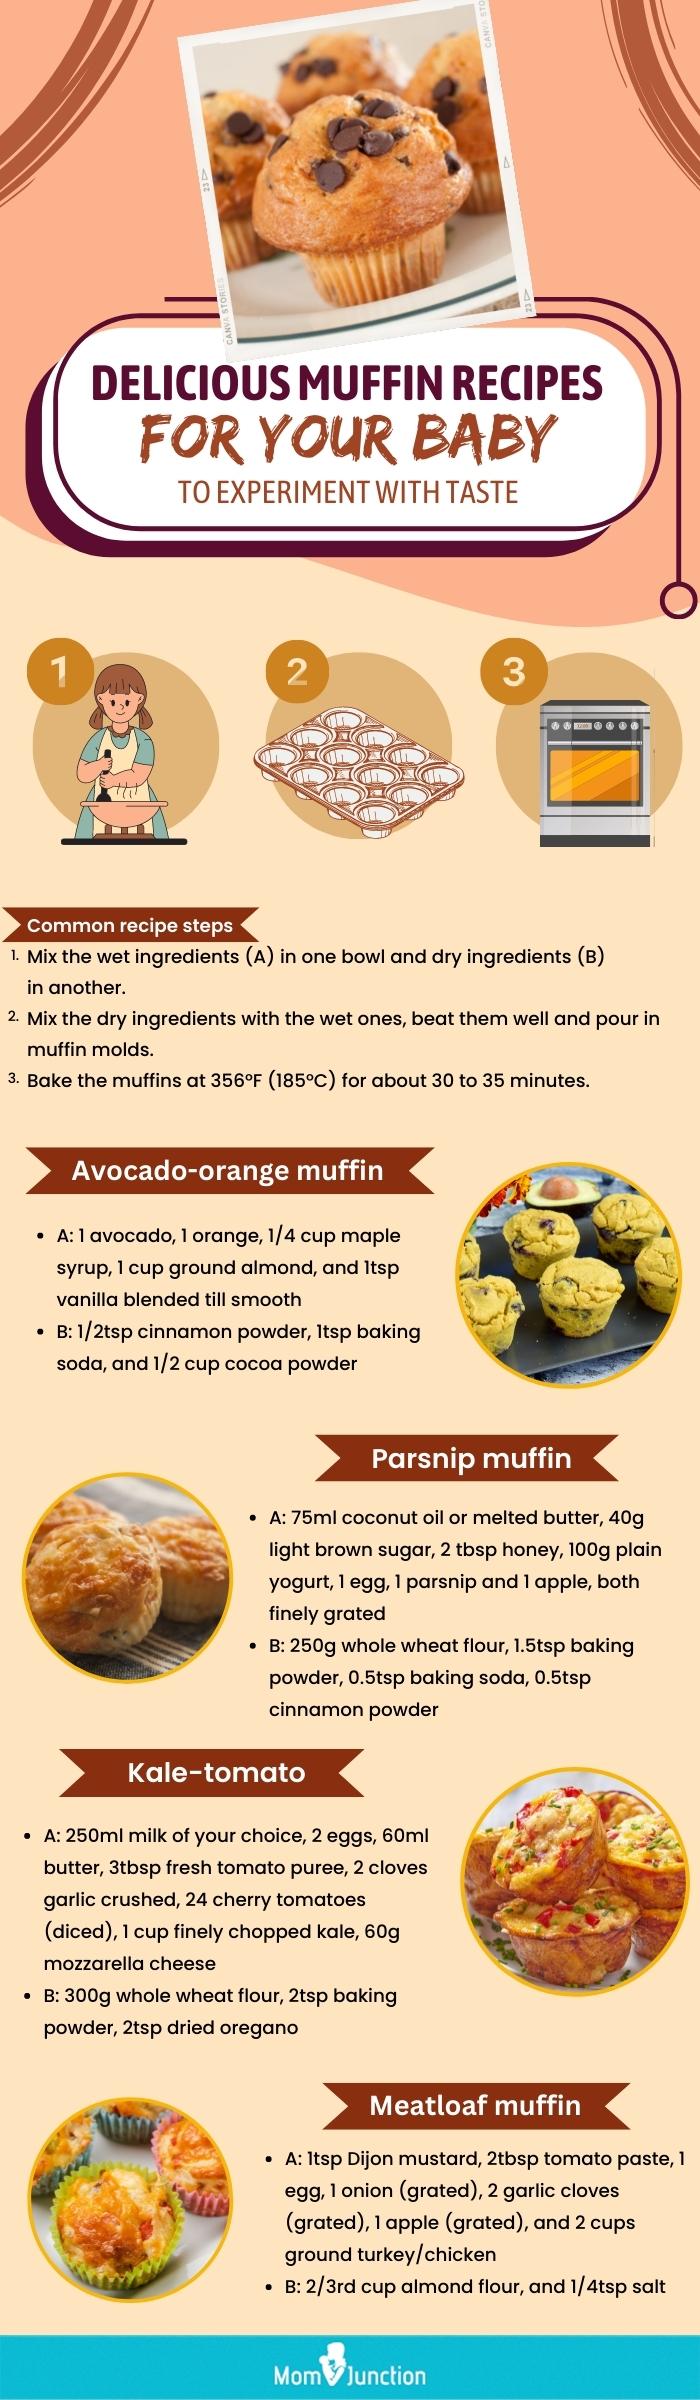 delicious muffin recipes for your baby to experiment with taste (infographic)